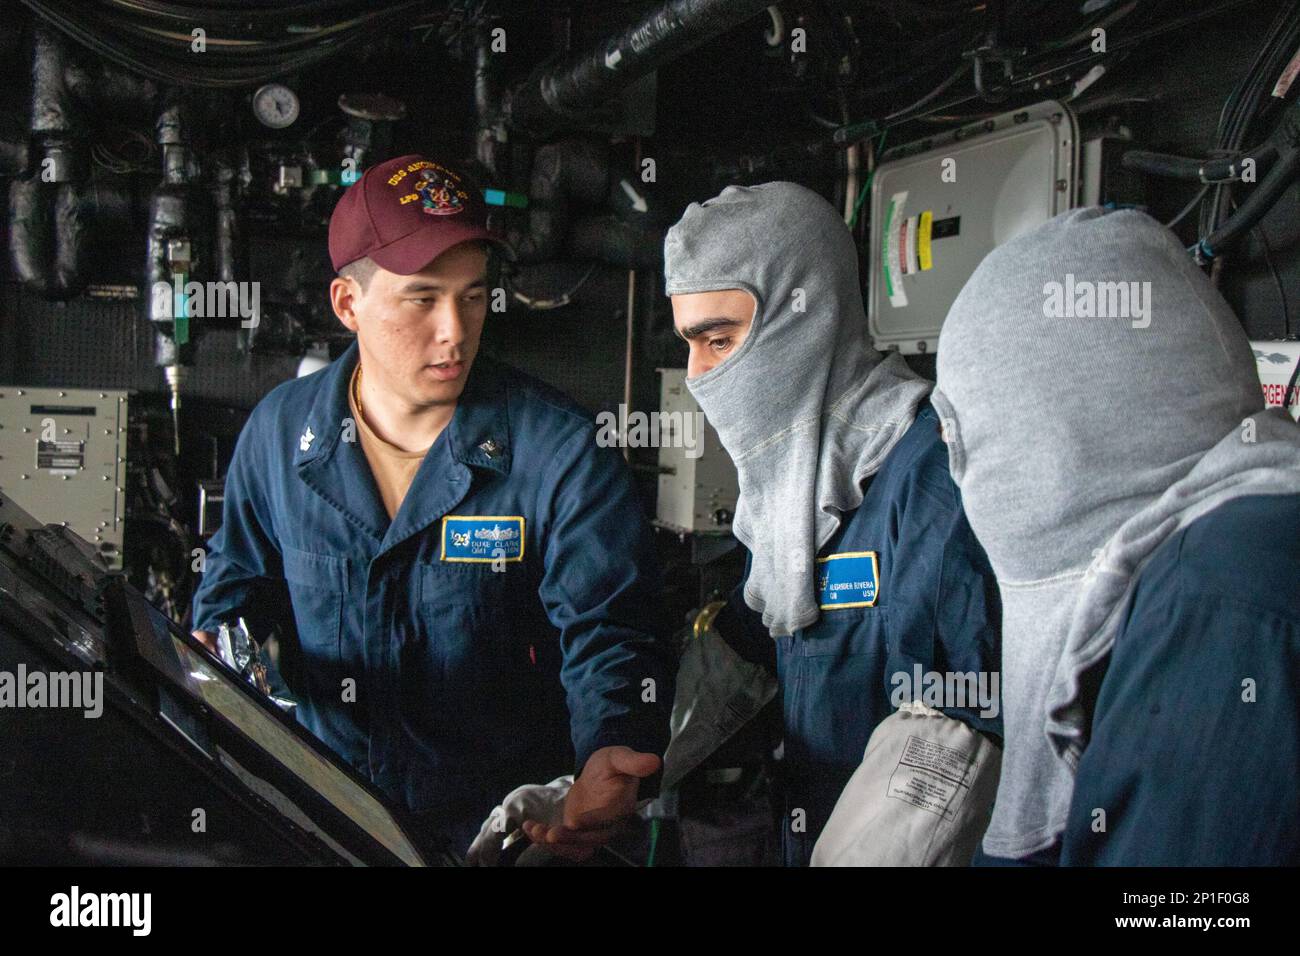 SINGAPORE (Feb. 20, 2023) – Quartermaster 1st Class Duke Clark, left, trains Quartermaster Seaman Alexander Rivera, center, and Quartermaster 3rd Class Lance Limbo on how to troubleshoot the Voyage Management System (VMS) after a GPS denial or spoofing attempt during a general quarters drill aboard amphibious transport dock USS Anchorage (LPD 23), Feb. 20, 2023. General quarters is a ship-wide alert for all hands to go to the positions they are to assume during combat or damage repair. The Makin Island Amphibious Ready Group, comprised of amphibious assault ship USS Makin Island (LHD 8) and am Stock Photo